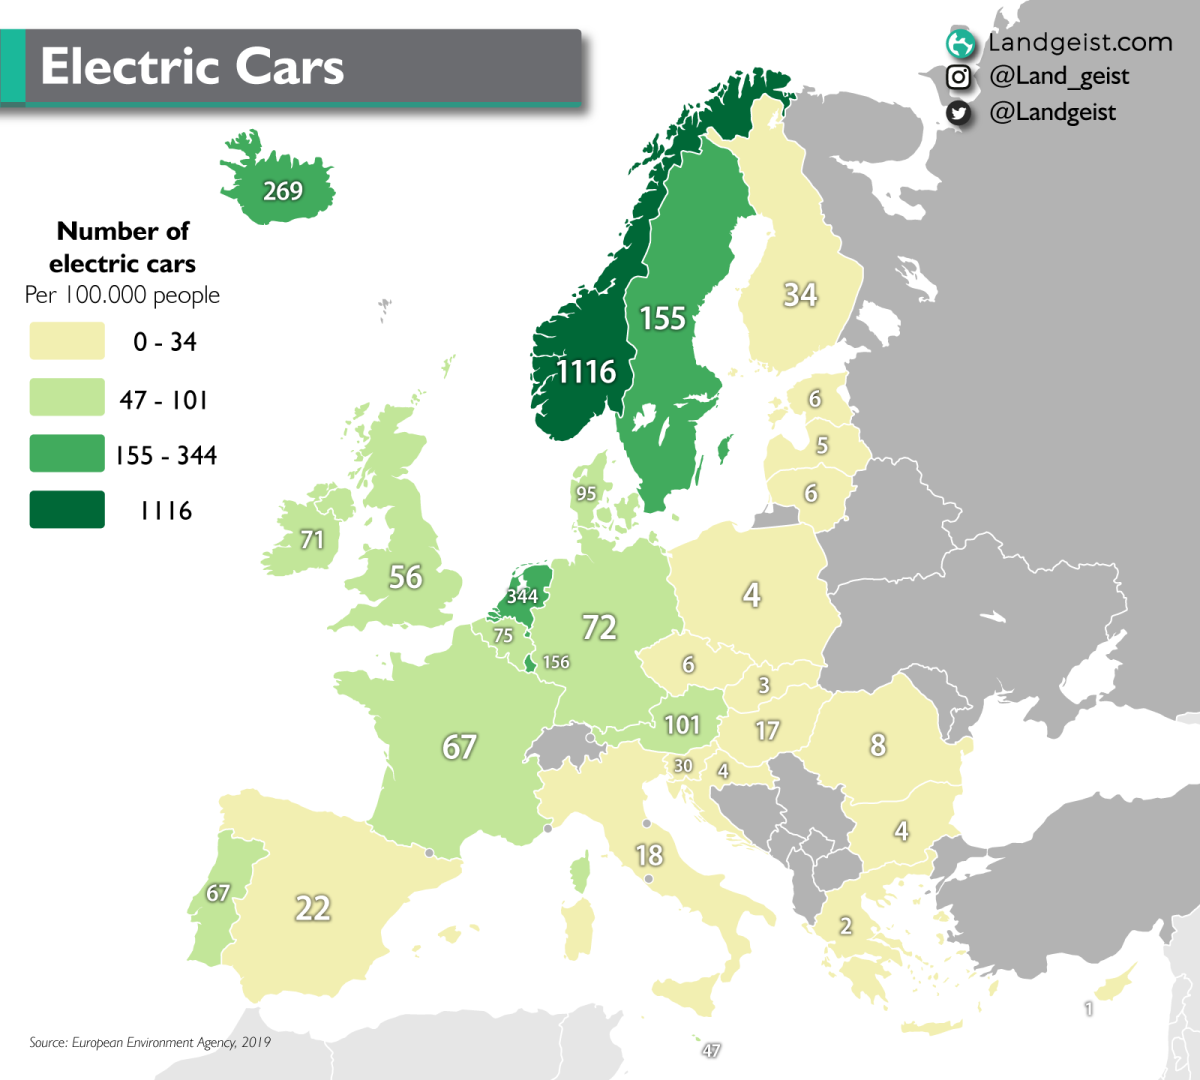 Electric cars in Europe